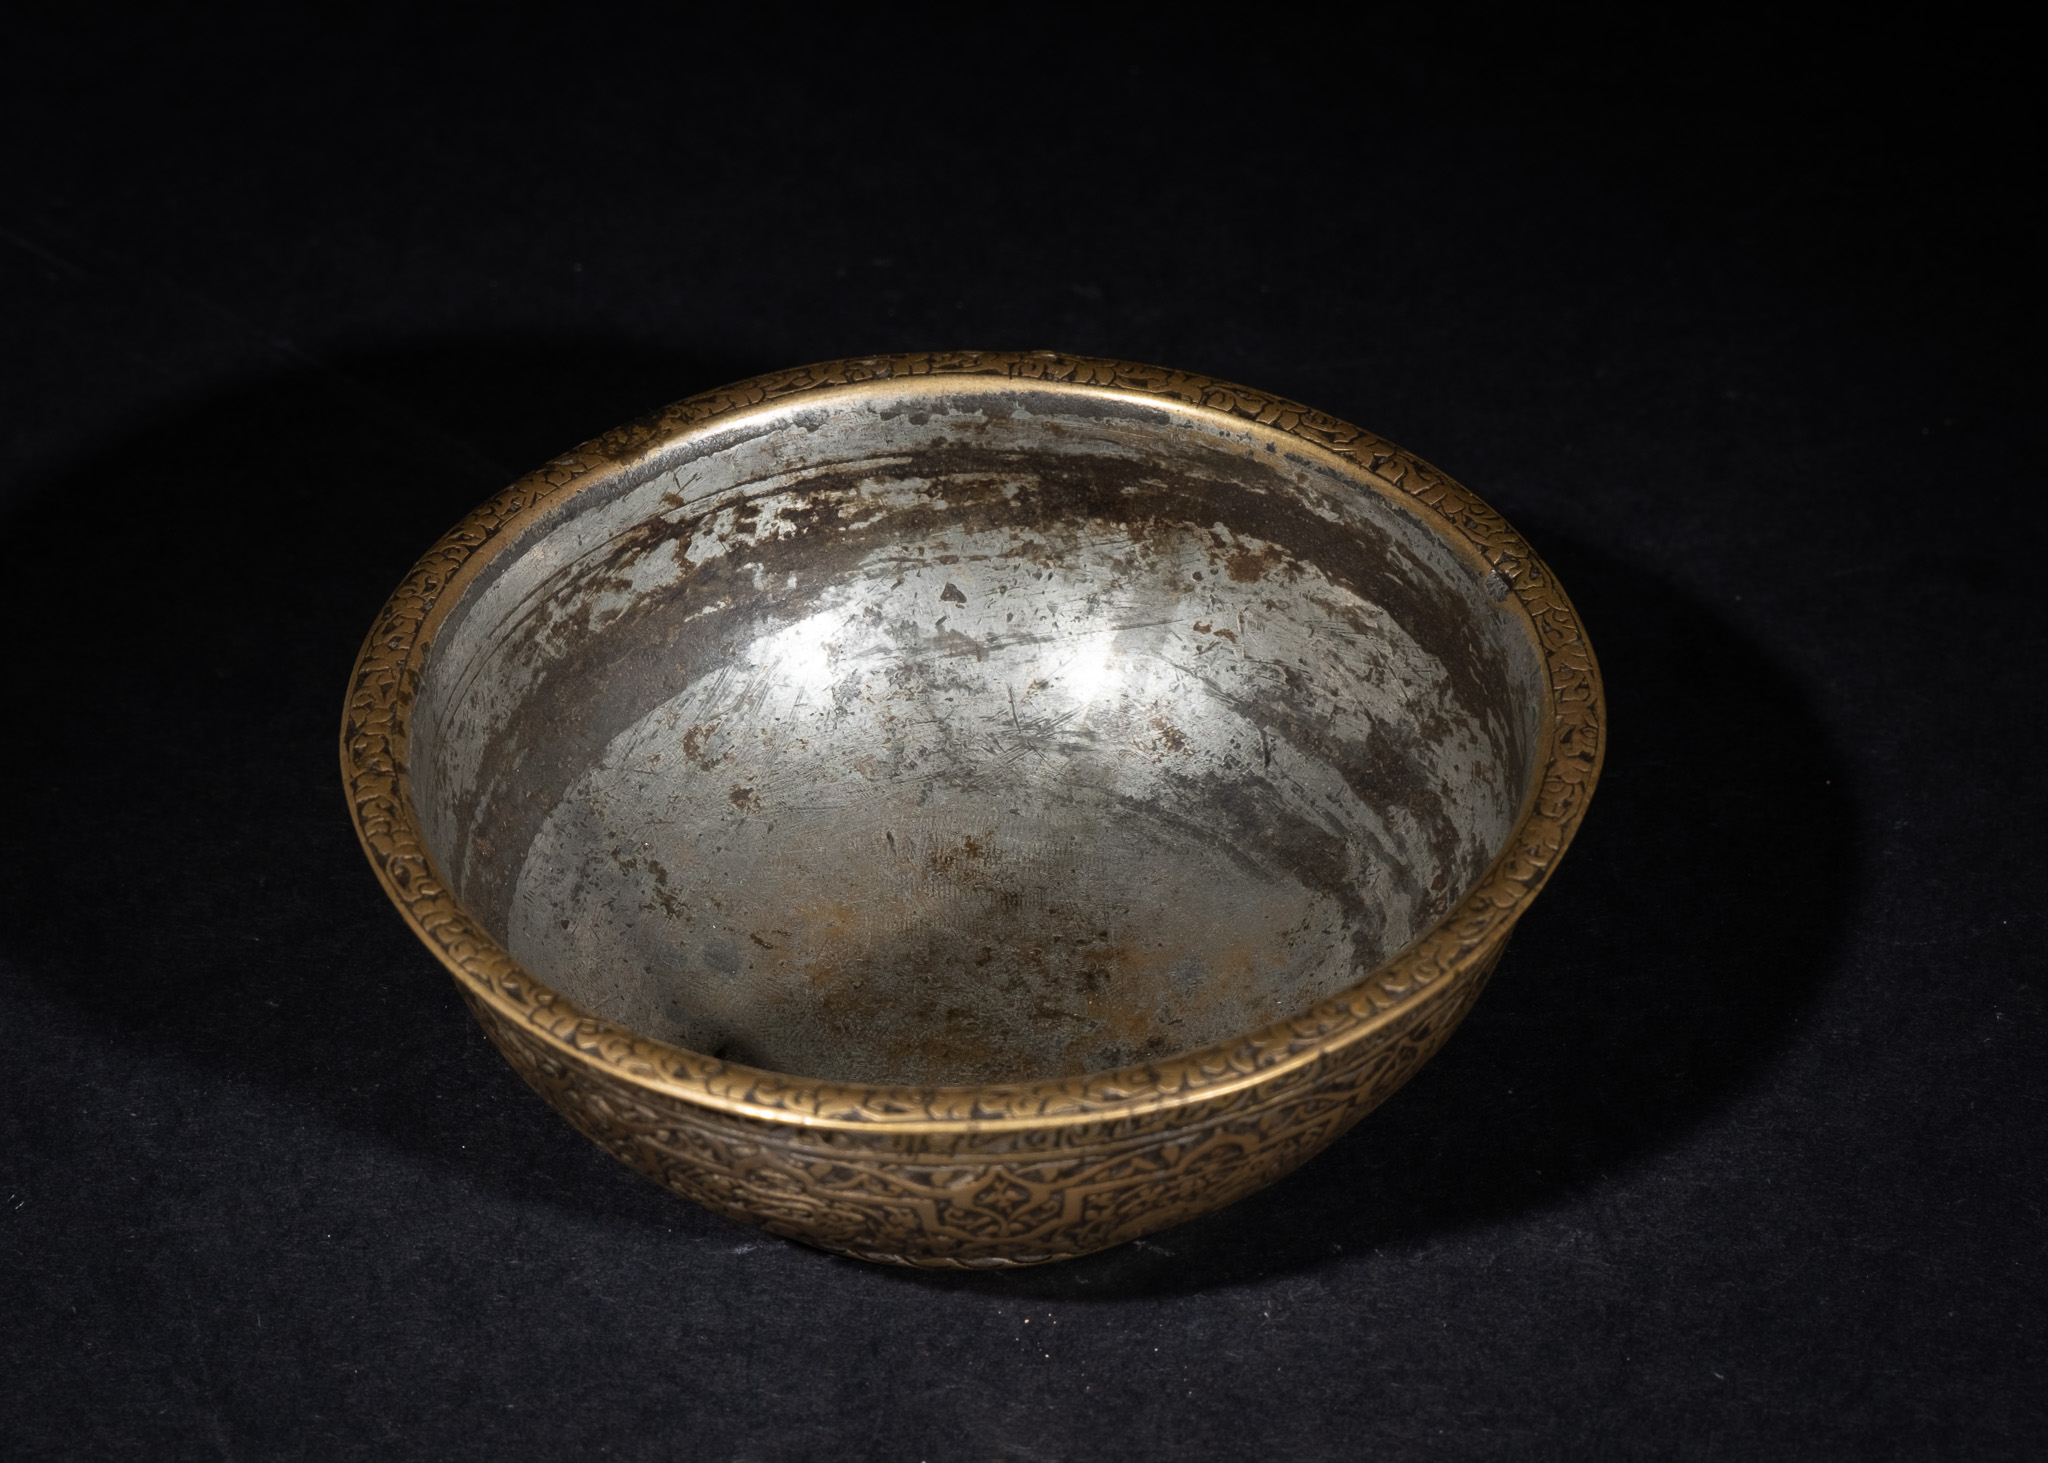 AN INSCRIBED SAFAVID TINNED COPPER BOWL, SIGNED MOHAMMAD SOLTANI, 17TH CENTURY - Image 2 of 3